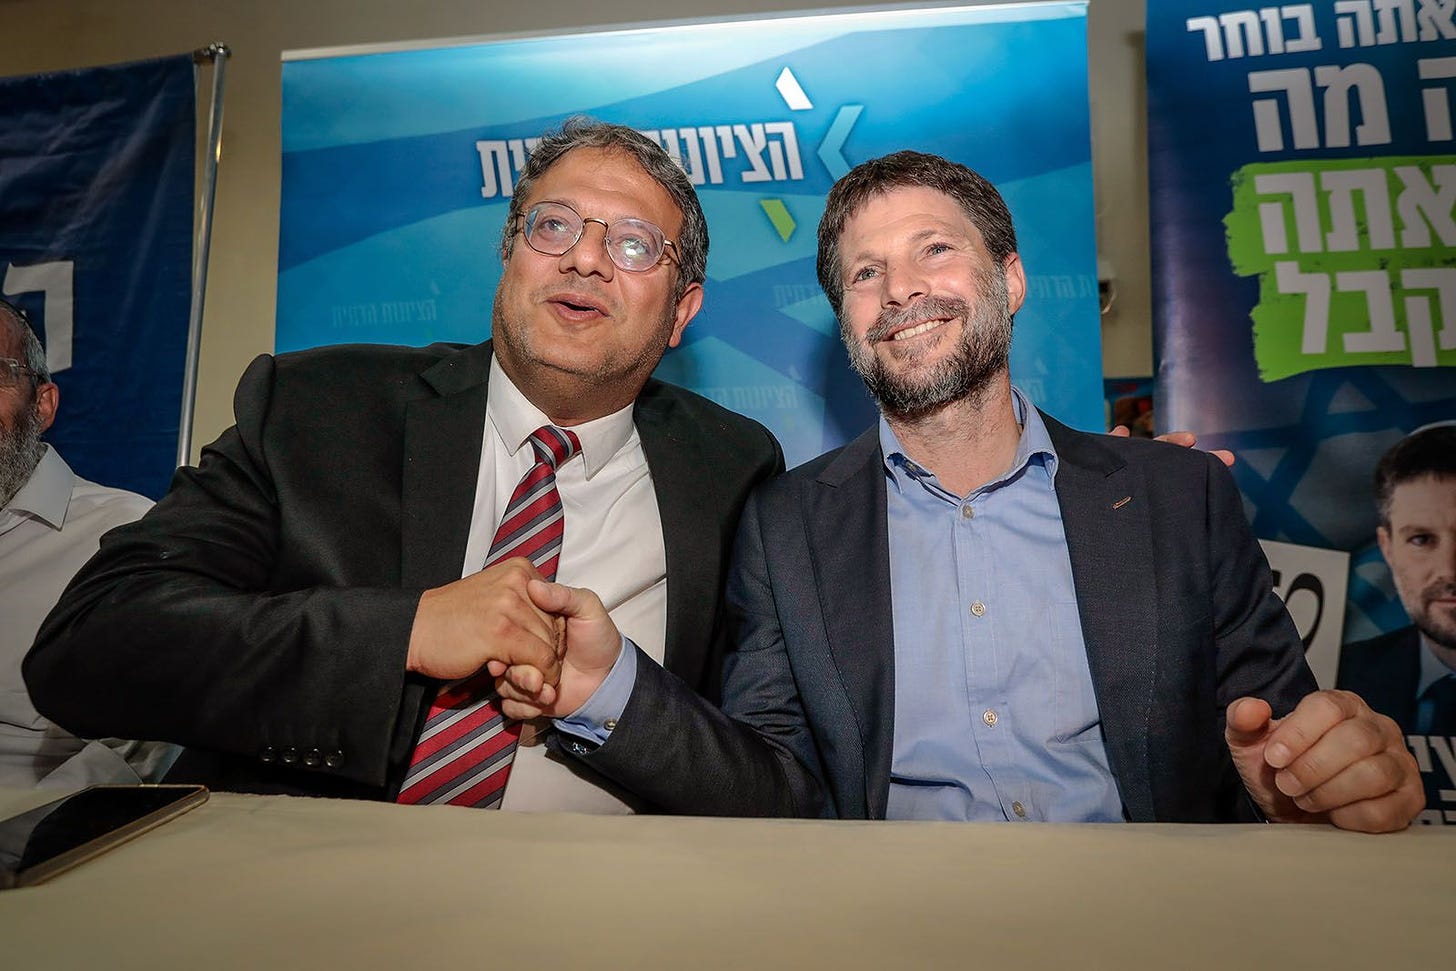 MK Itamar Ben Gvir, head of the Otzma Yehudit political party, and MK Bezalel Smotrich, Chairman of the Religious Zionism party, at an election campaign event in Sderot, October 26, 2022. (Photo by Flash90)